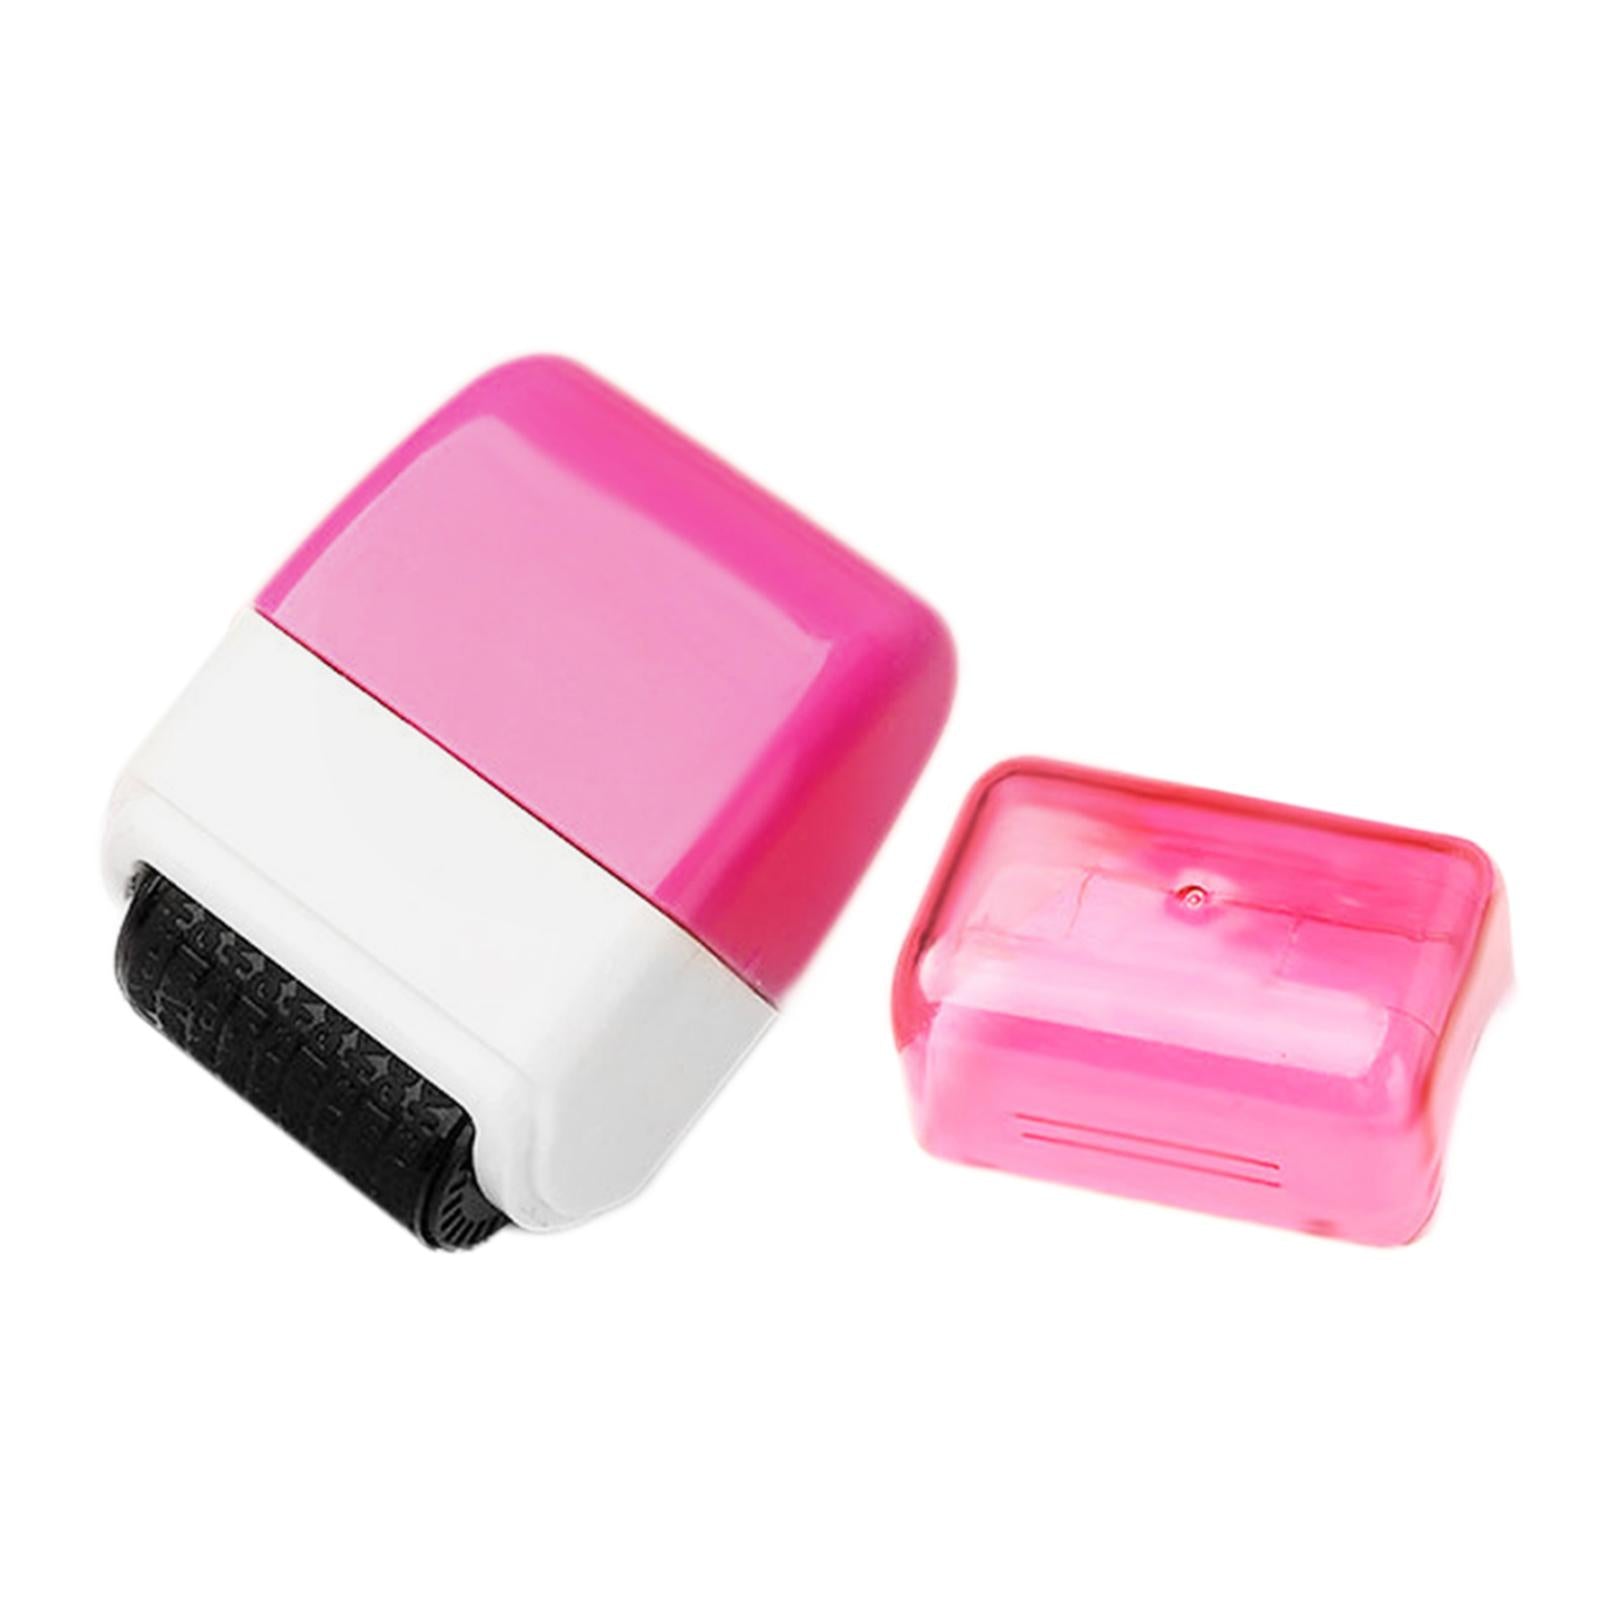 Protection Privacy Data Roller Stamp Seal Defend ID Information Security Pink